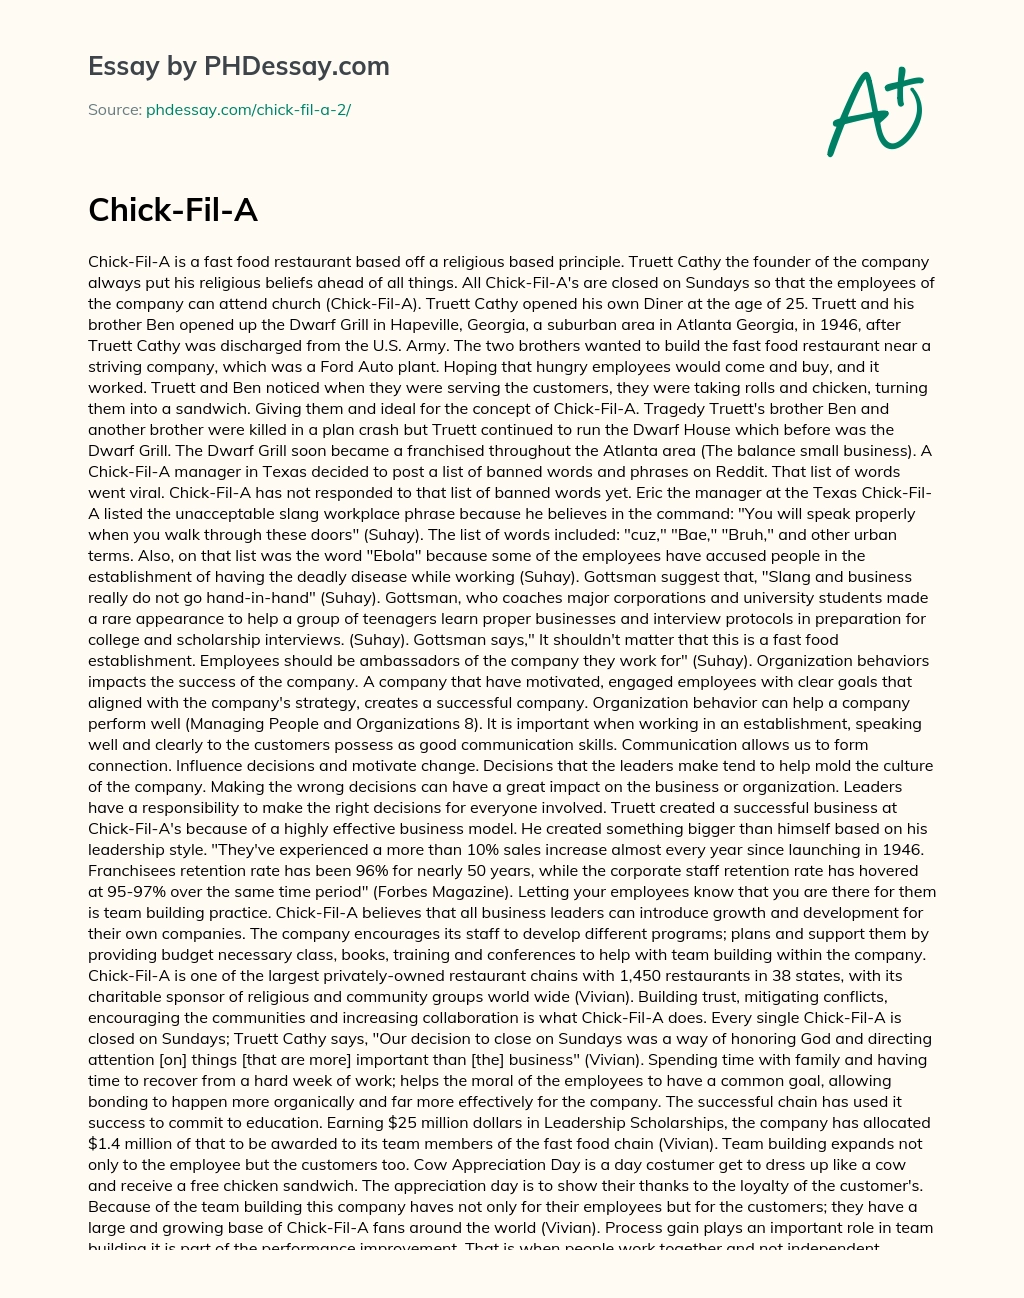 Chick-Fil-A’s Religious Roots and Early History essay